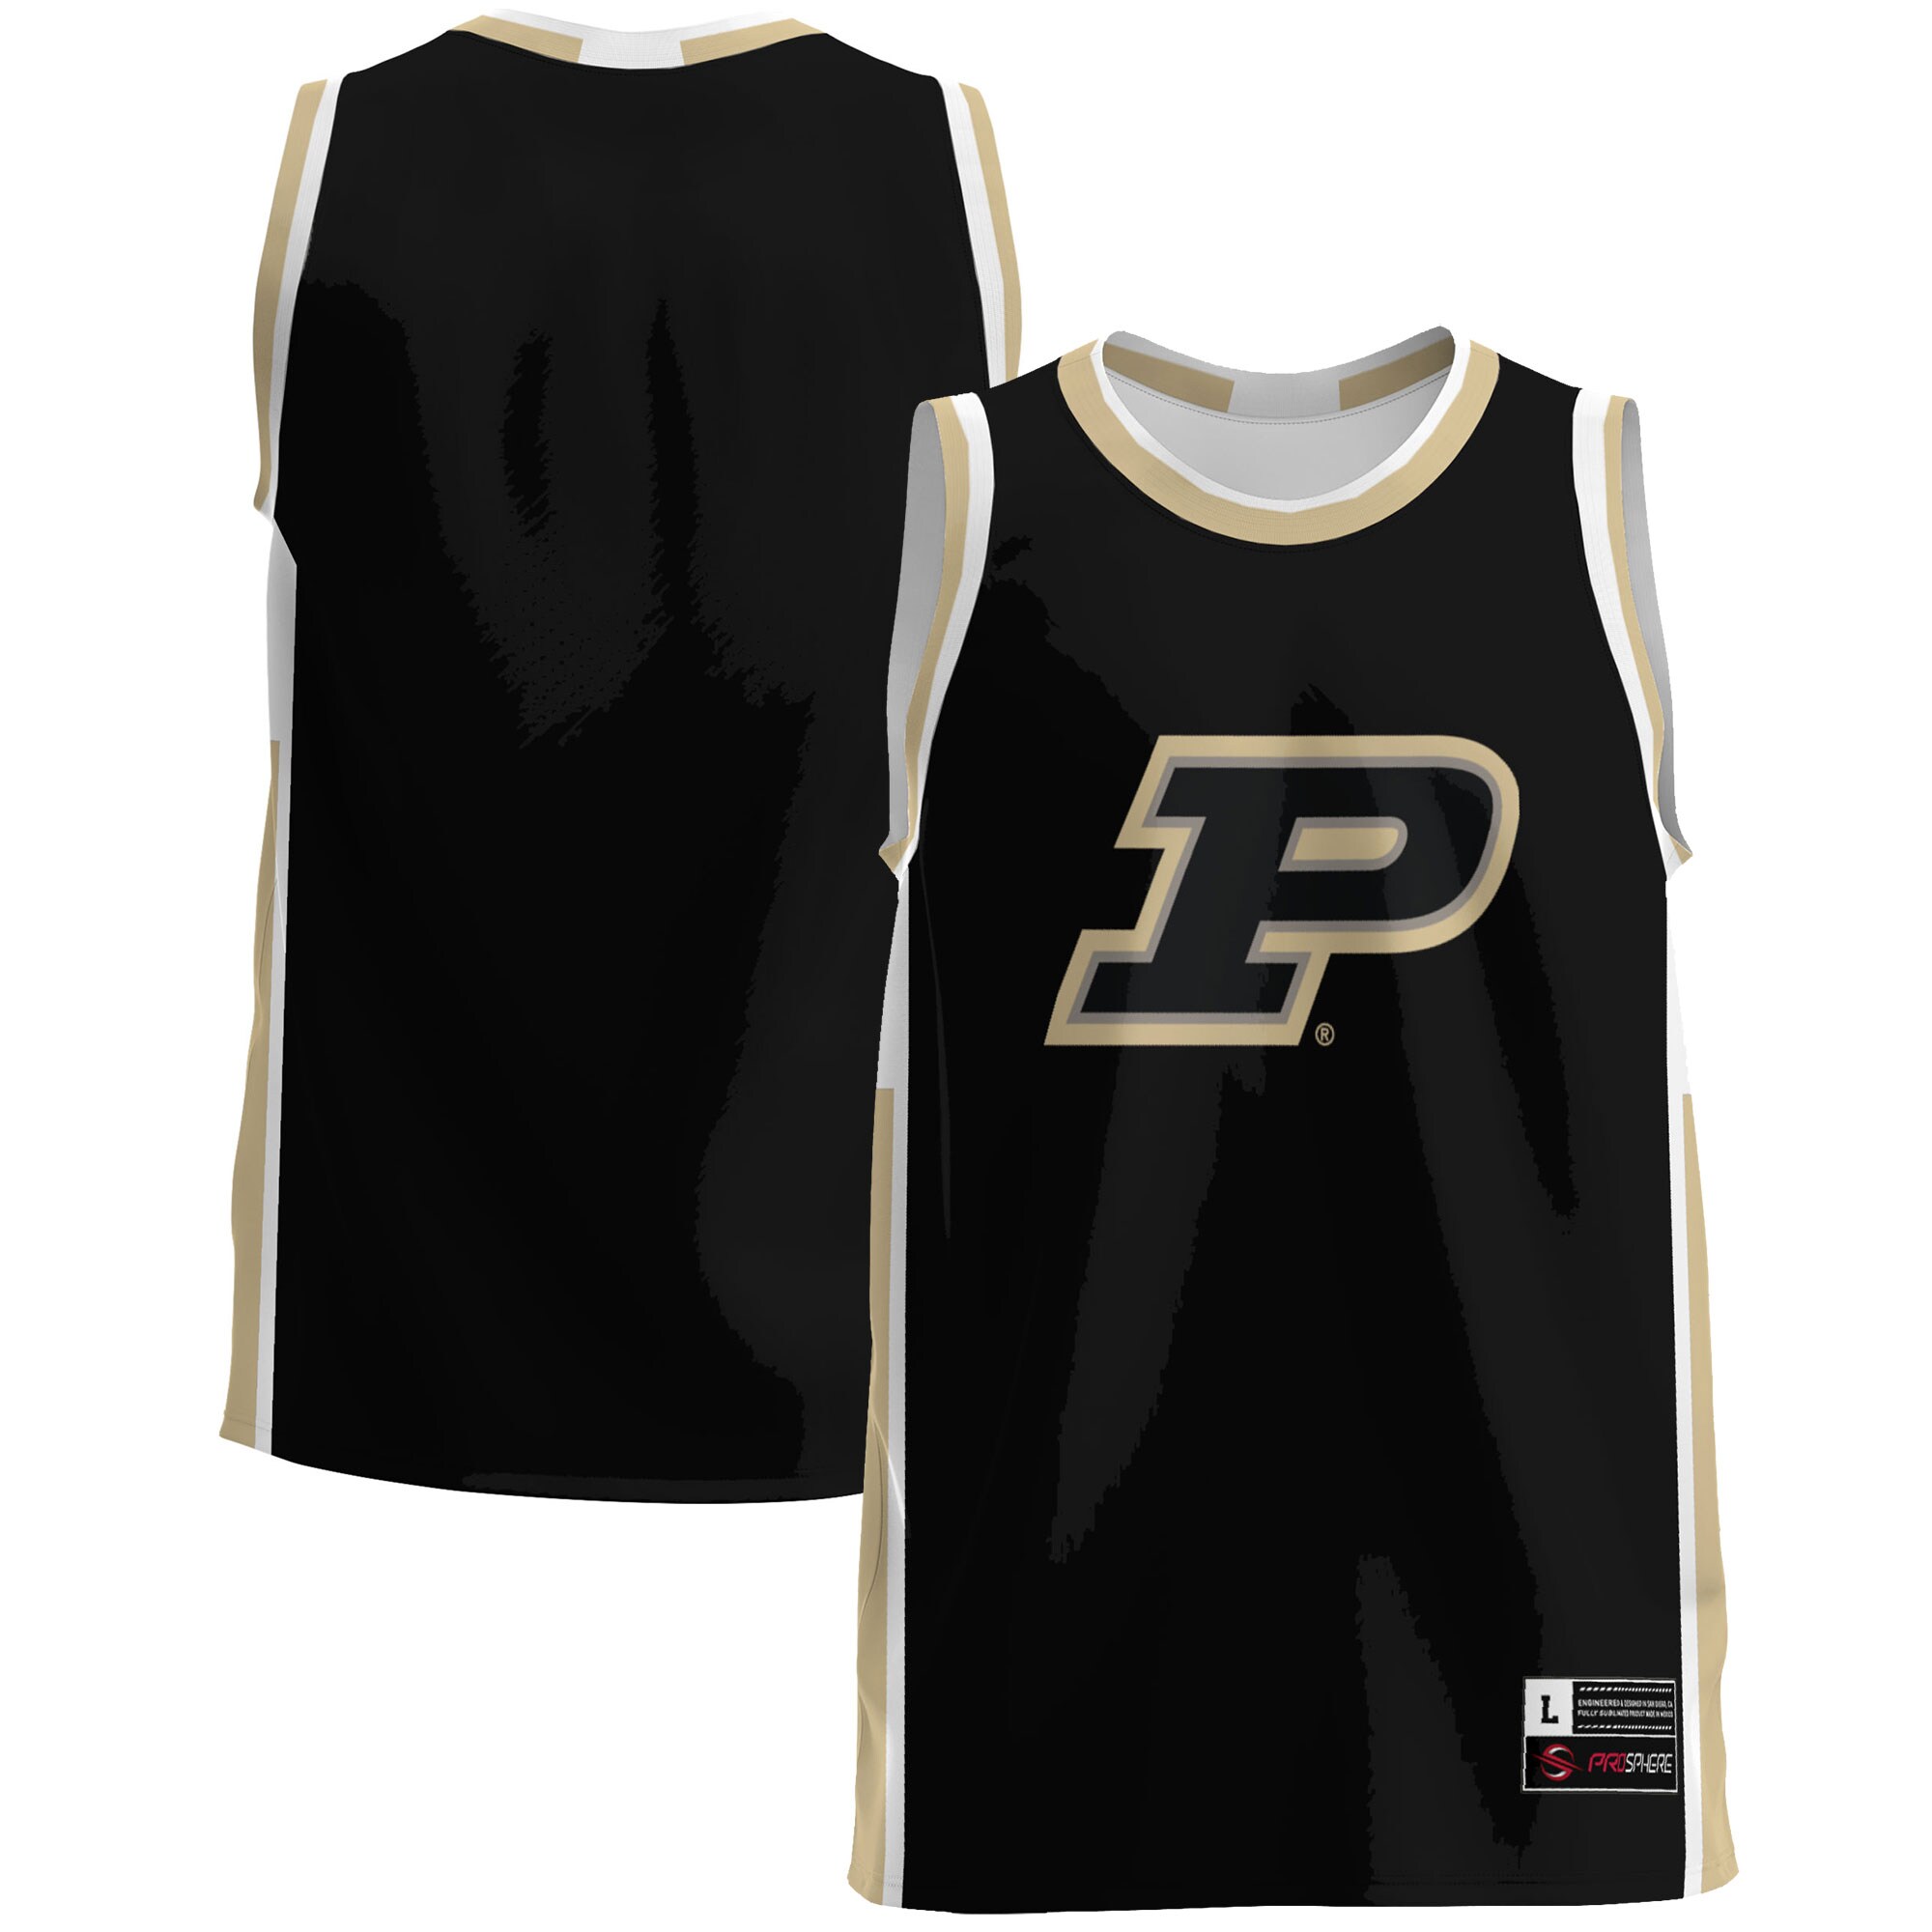 Purdue Boilermakers Basketball Jersey - Black For Youth Women Men